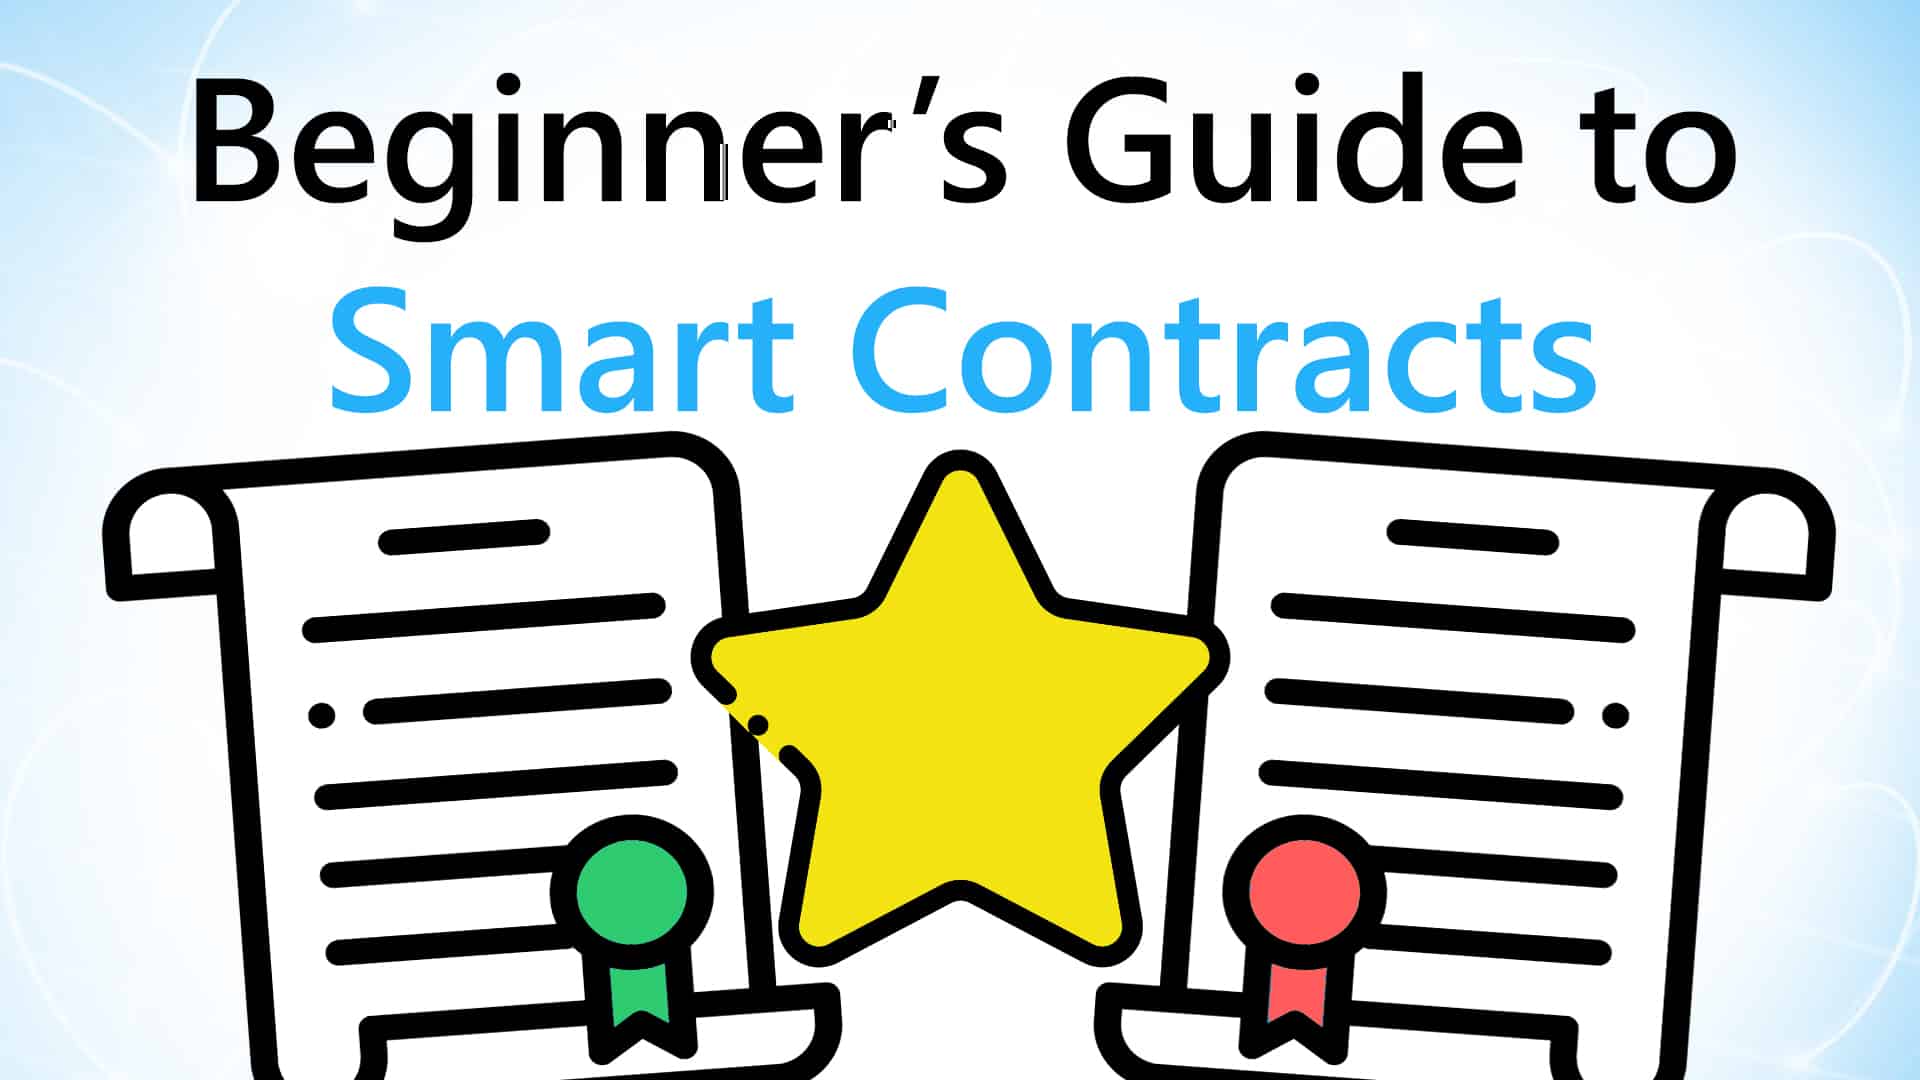 Video Guide: What are Smart Contracts?